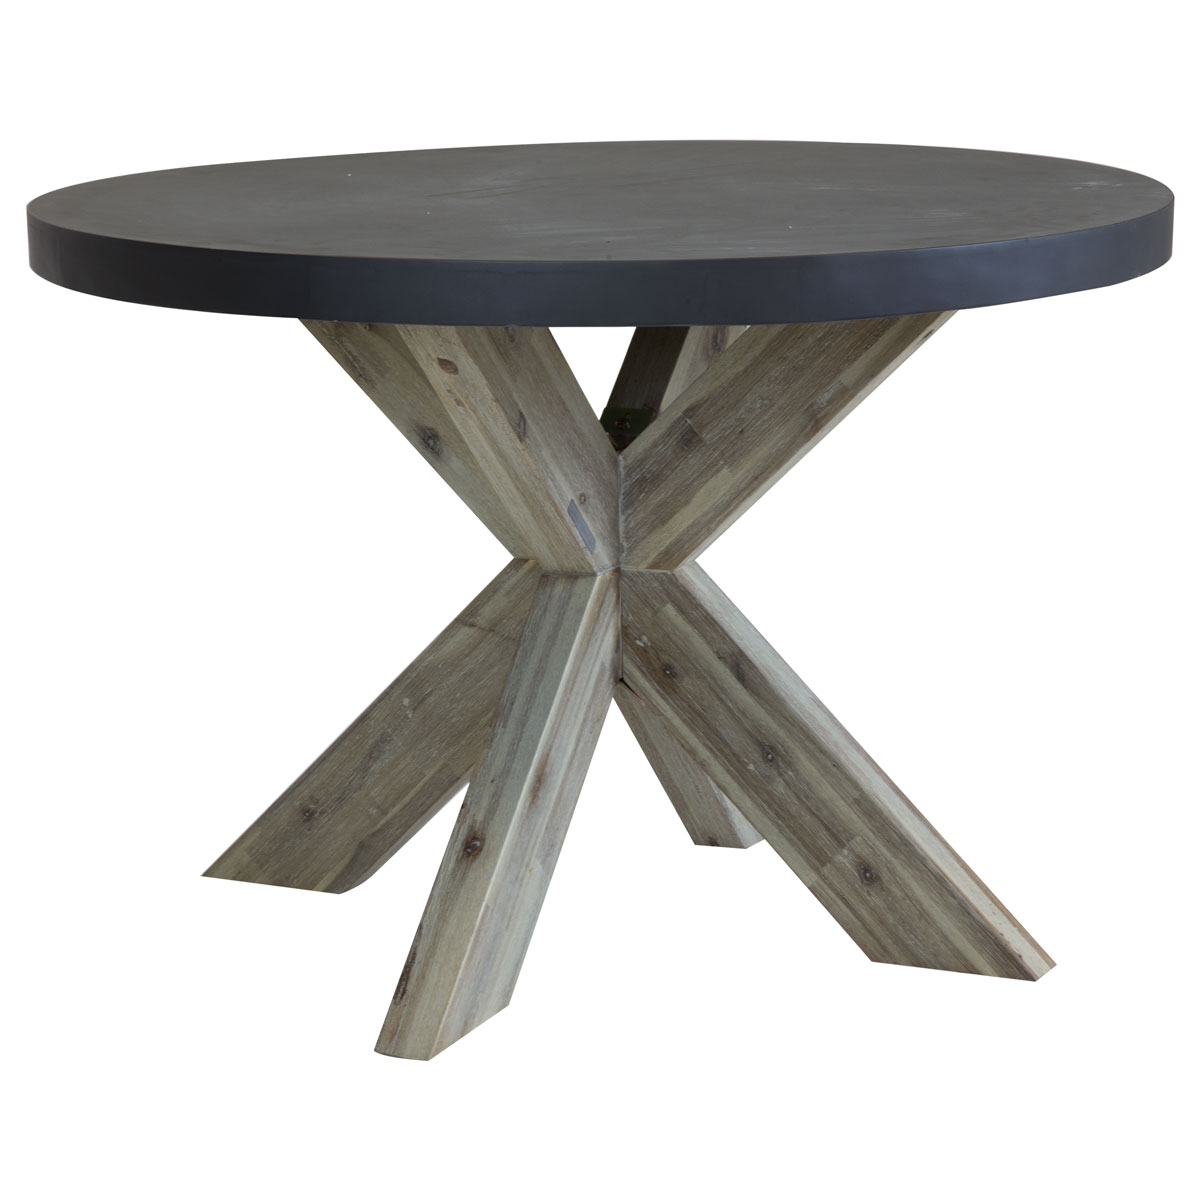 Charles Bentley Round Fibre Cement Wood Dining Table